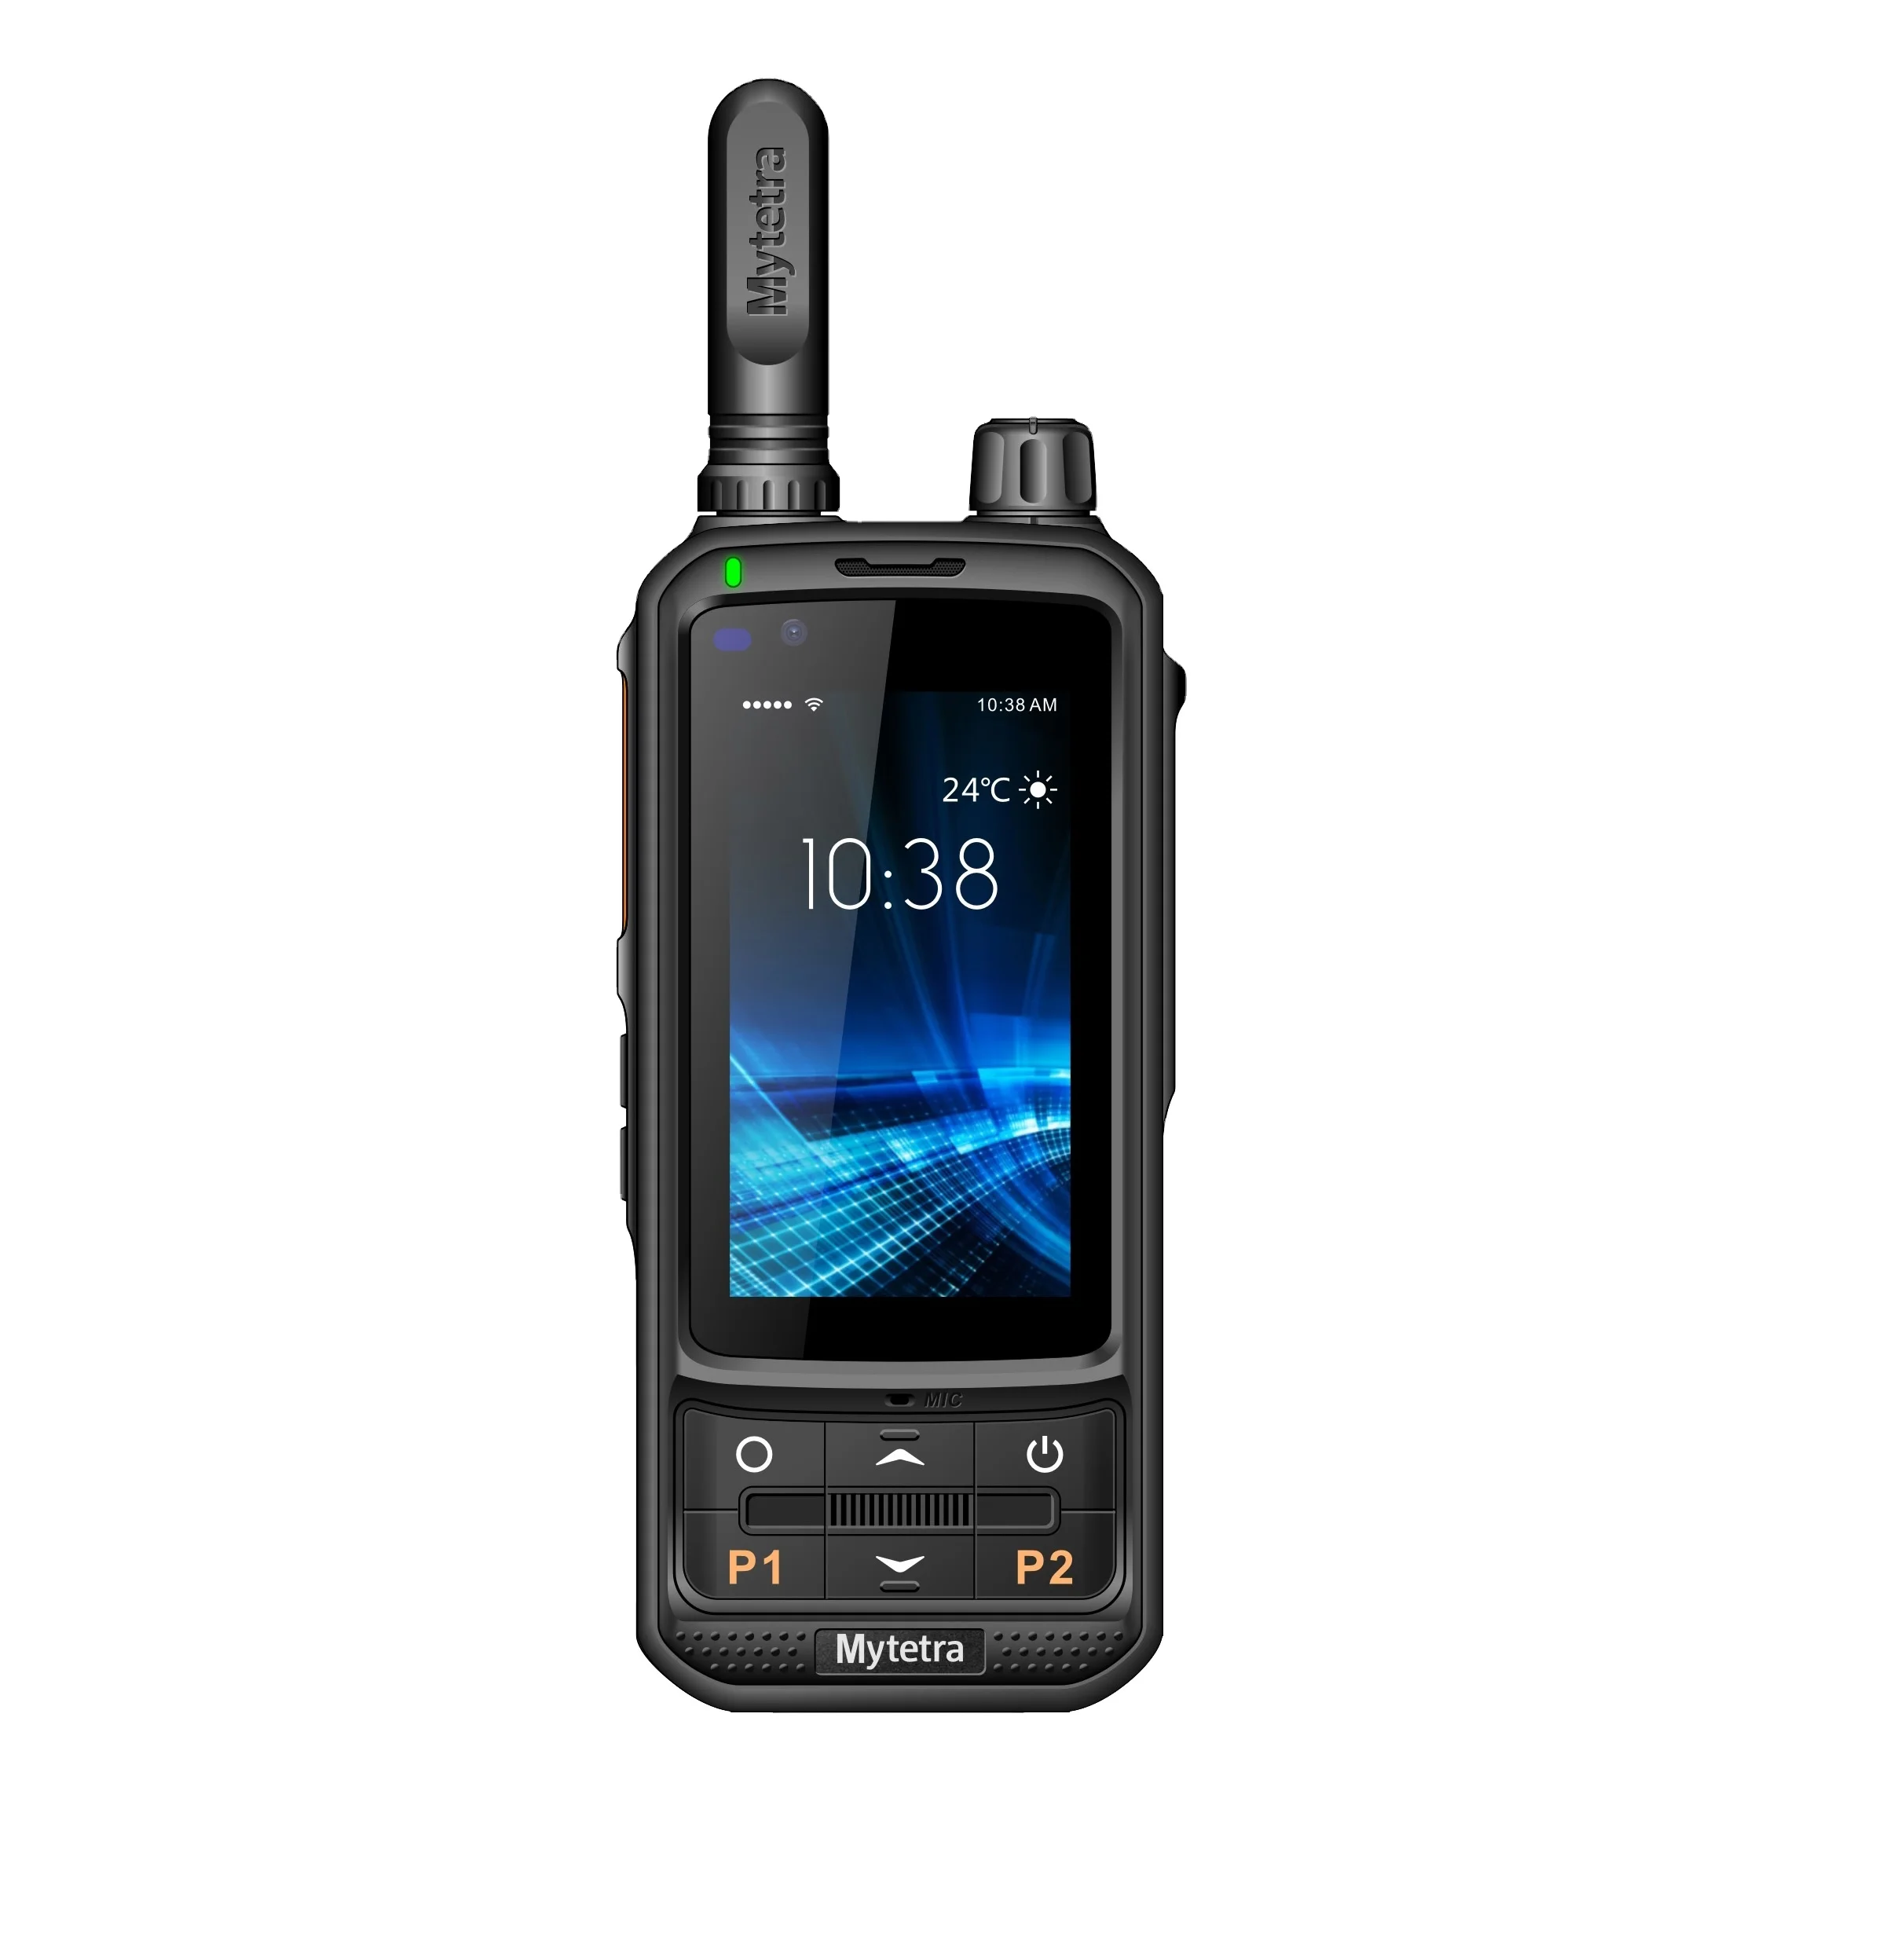 

New arrival Mytetra V970S Android Zello Radio PoC Network walkie talkie 4G LTE Two Way Radio with GPS NFC